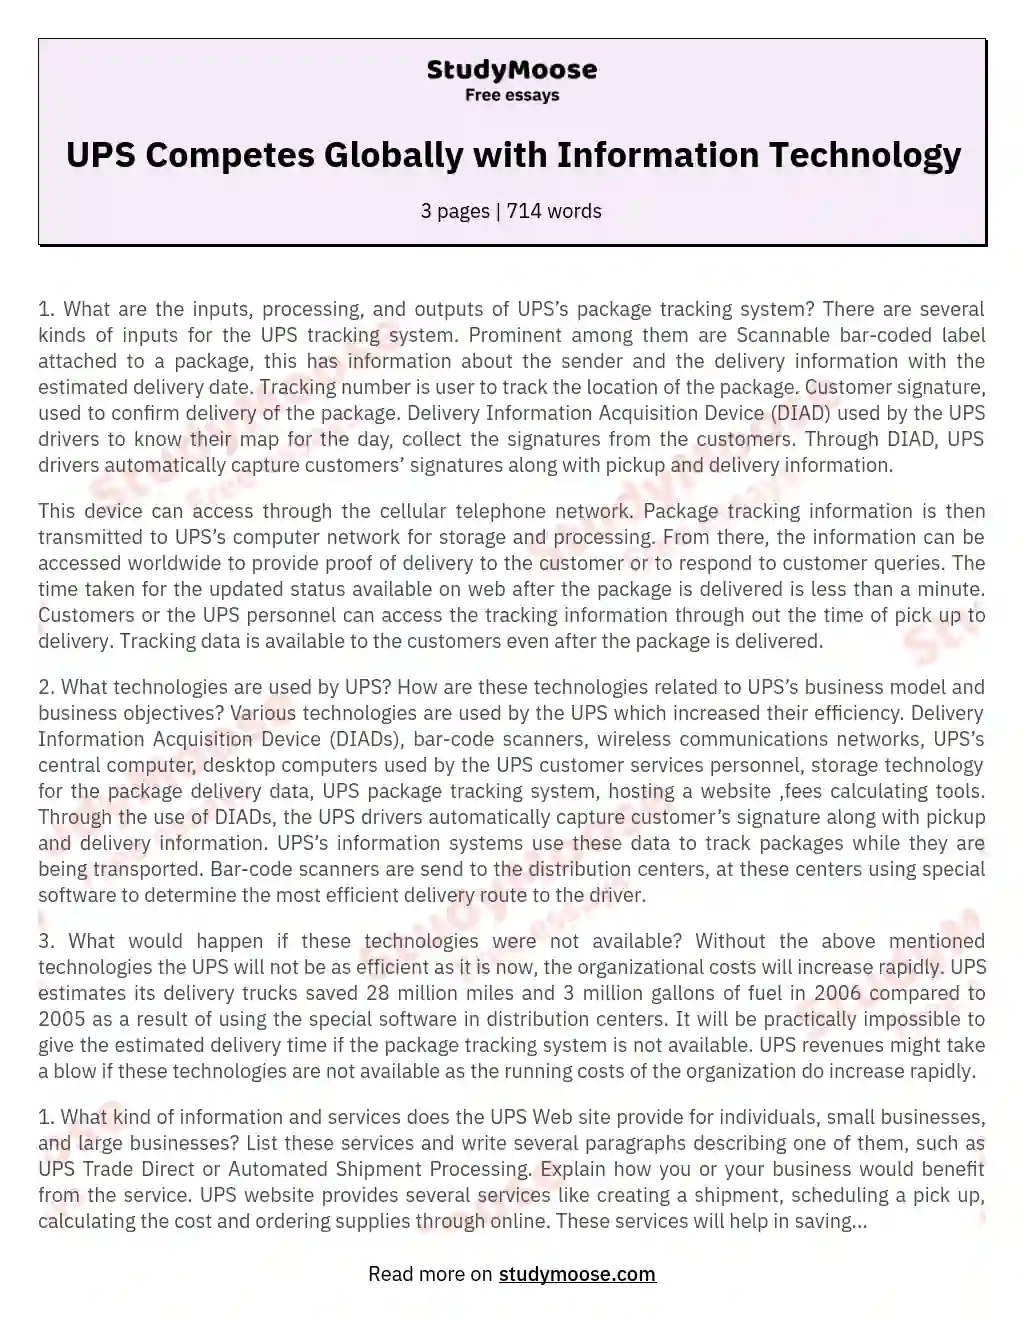 UPS Competes Globally with Information Technology essay